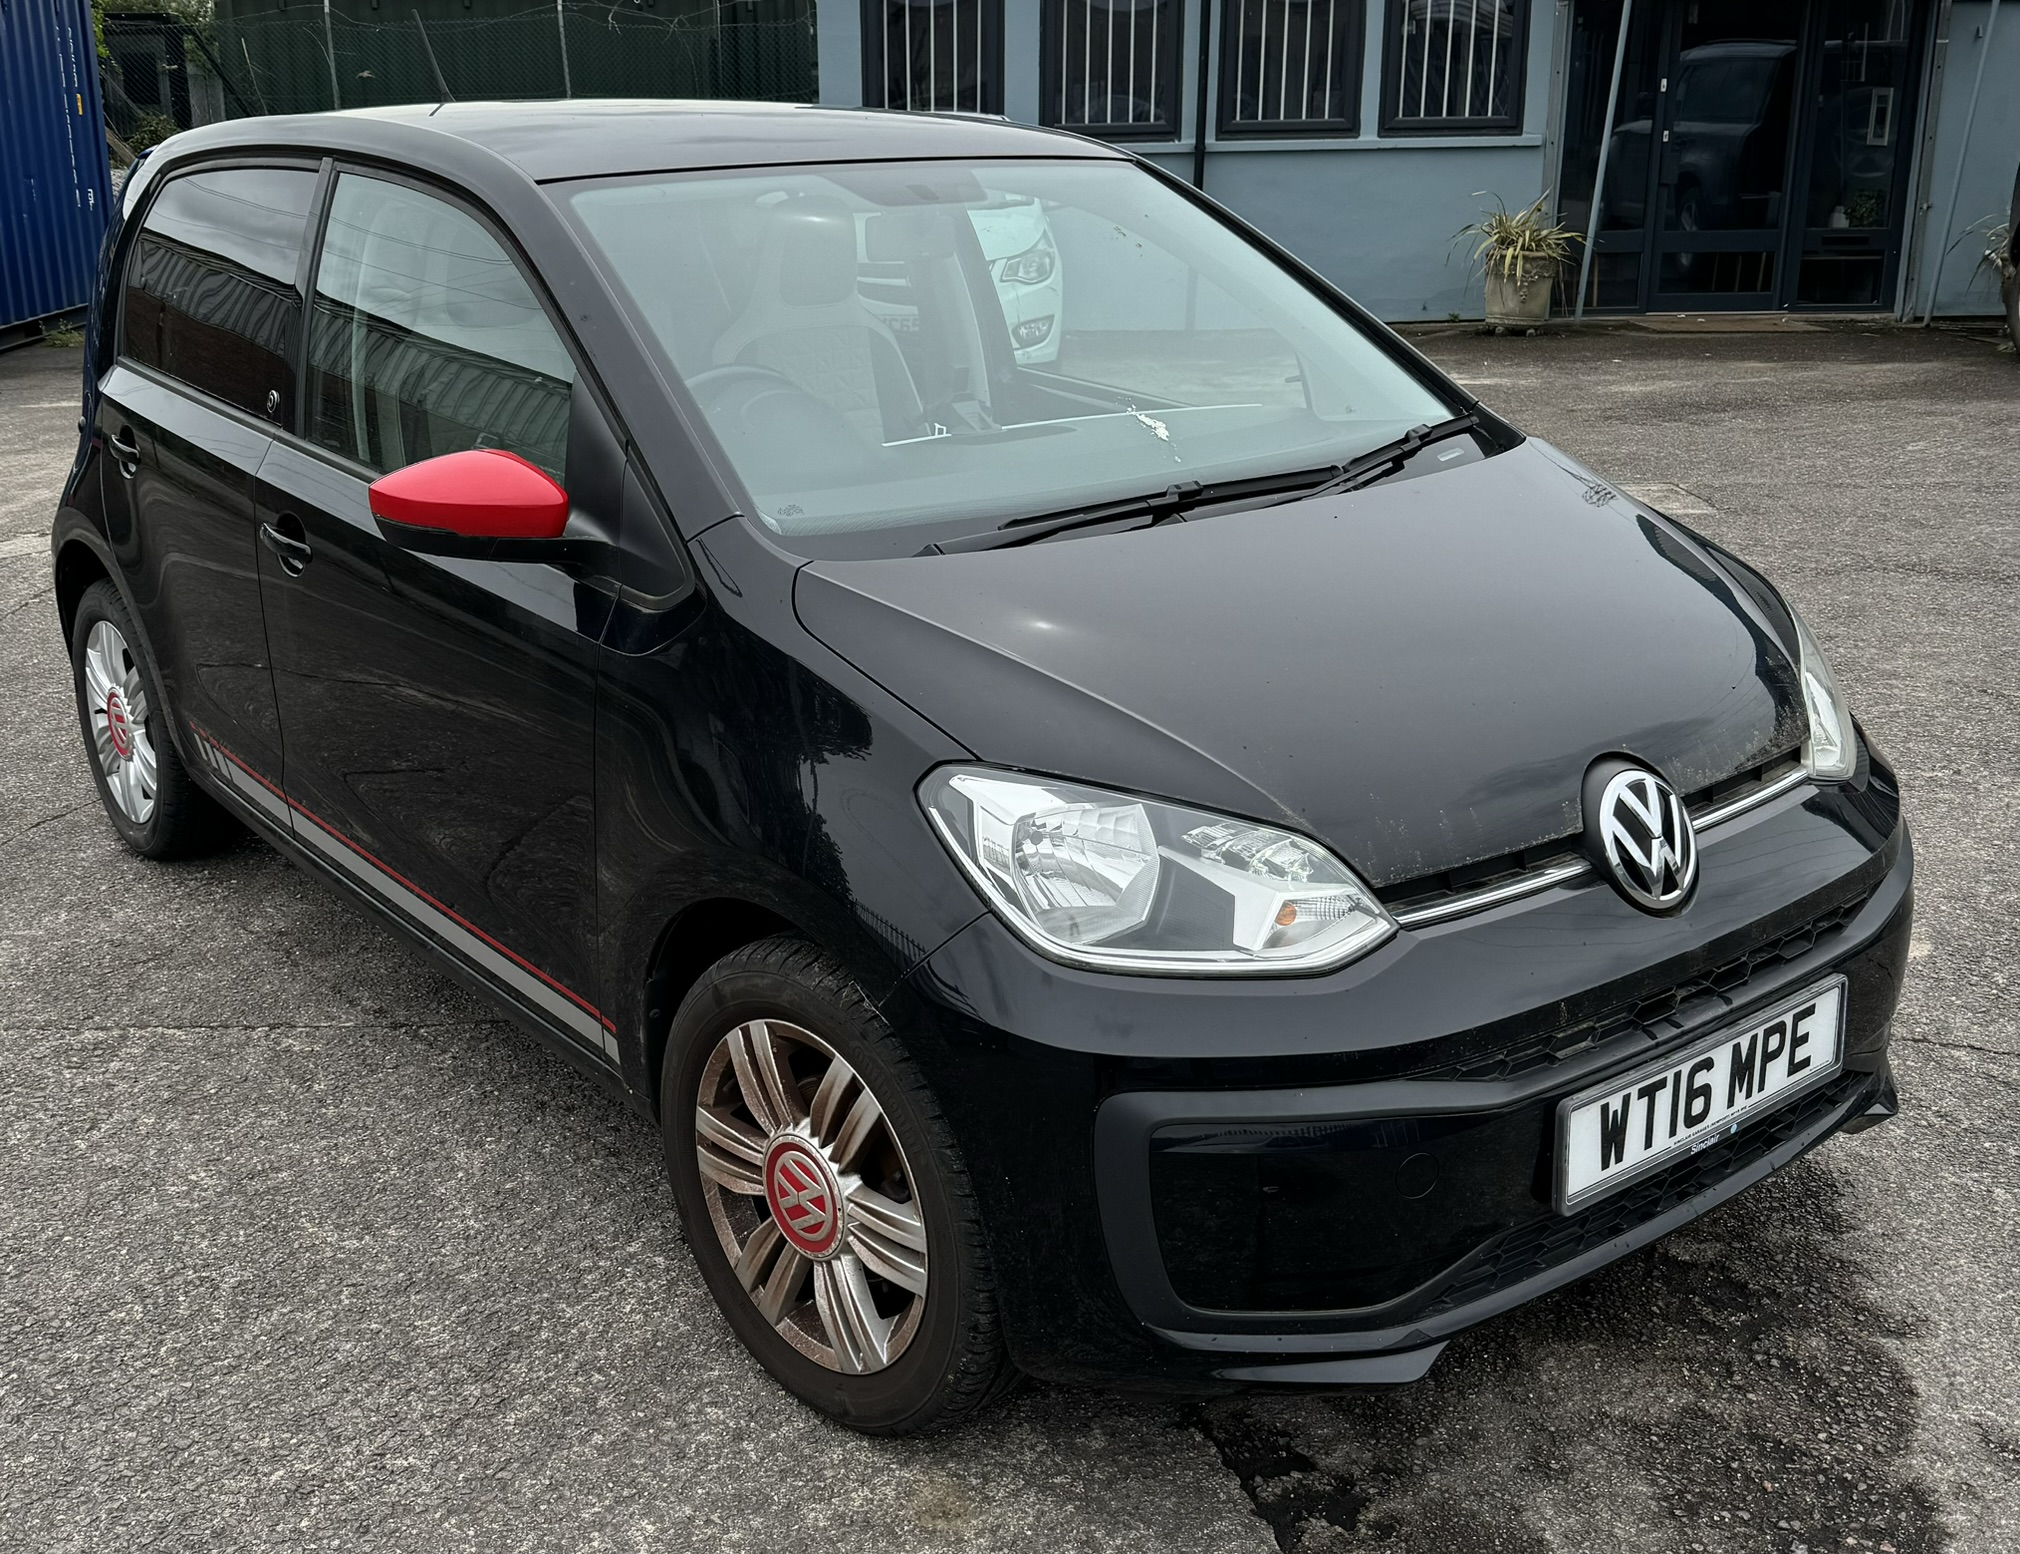 A 2016 Volkswagen UP by beats, 999cc, registration number WT16 MPE in black, MOT until 05/07/24, - Image 8 of 9